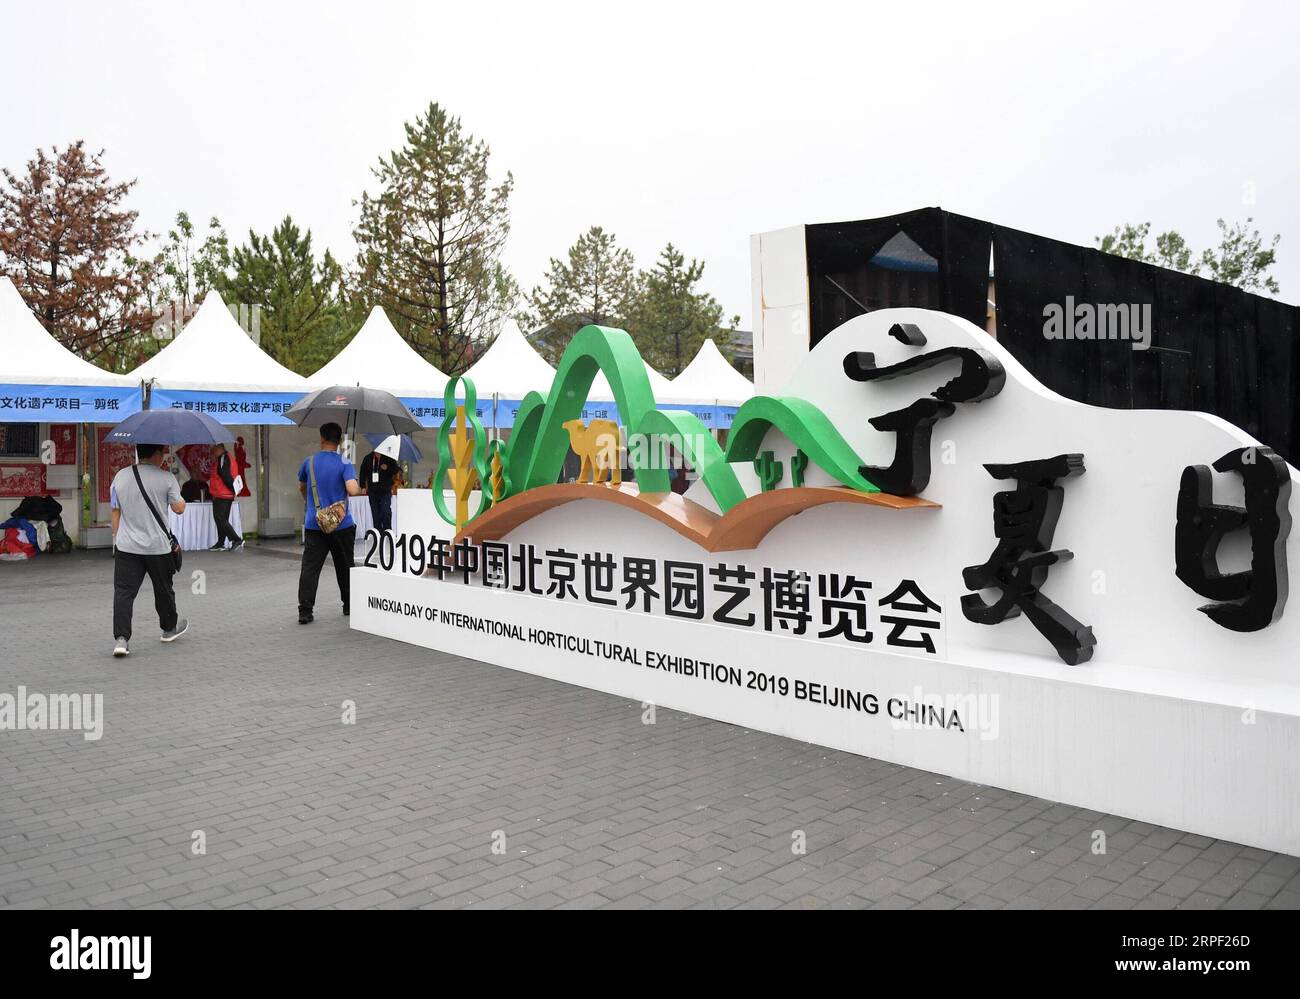 (190910) -- BEIJING, Sept. 10, 2019 -- Tourists visit the Ningxia Garden at the Beijing International Horticultural Exhibition in Beijing, capital of China, Sept. 10, 2019. Located in the northwestern China, Ningxia is rich in natural beauties ranging from waterside landscape to scenery in cold regions. As an important protection barrier of ecological system in northwestern China, Ningxia plays a significant role in safeguarding the whole country s ecological environment. Surrounded by deserts on three sides, Ningxia is faced with arduous tasks on desertification control. With 70 years of effo Stock Photo